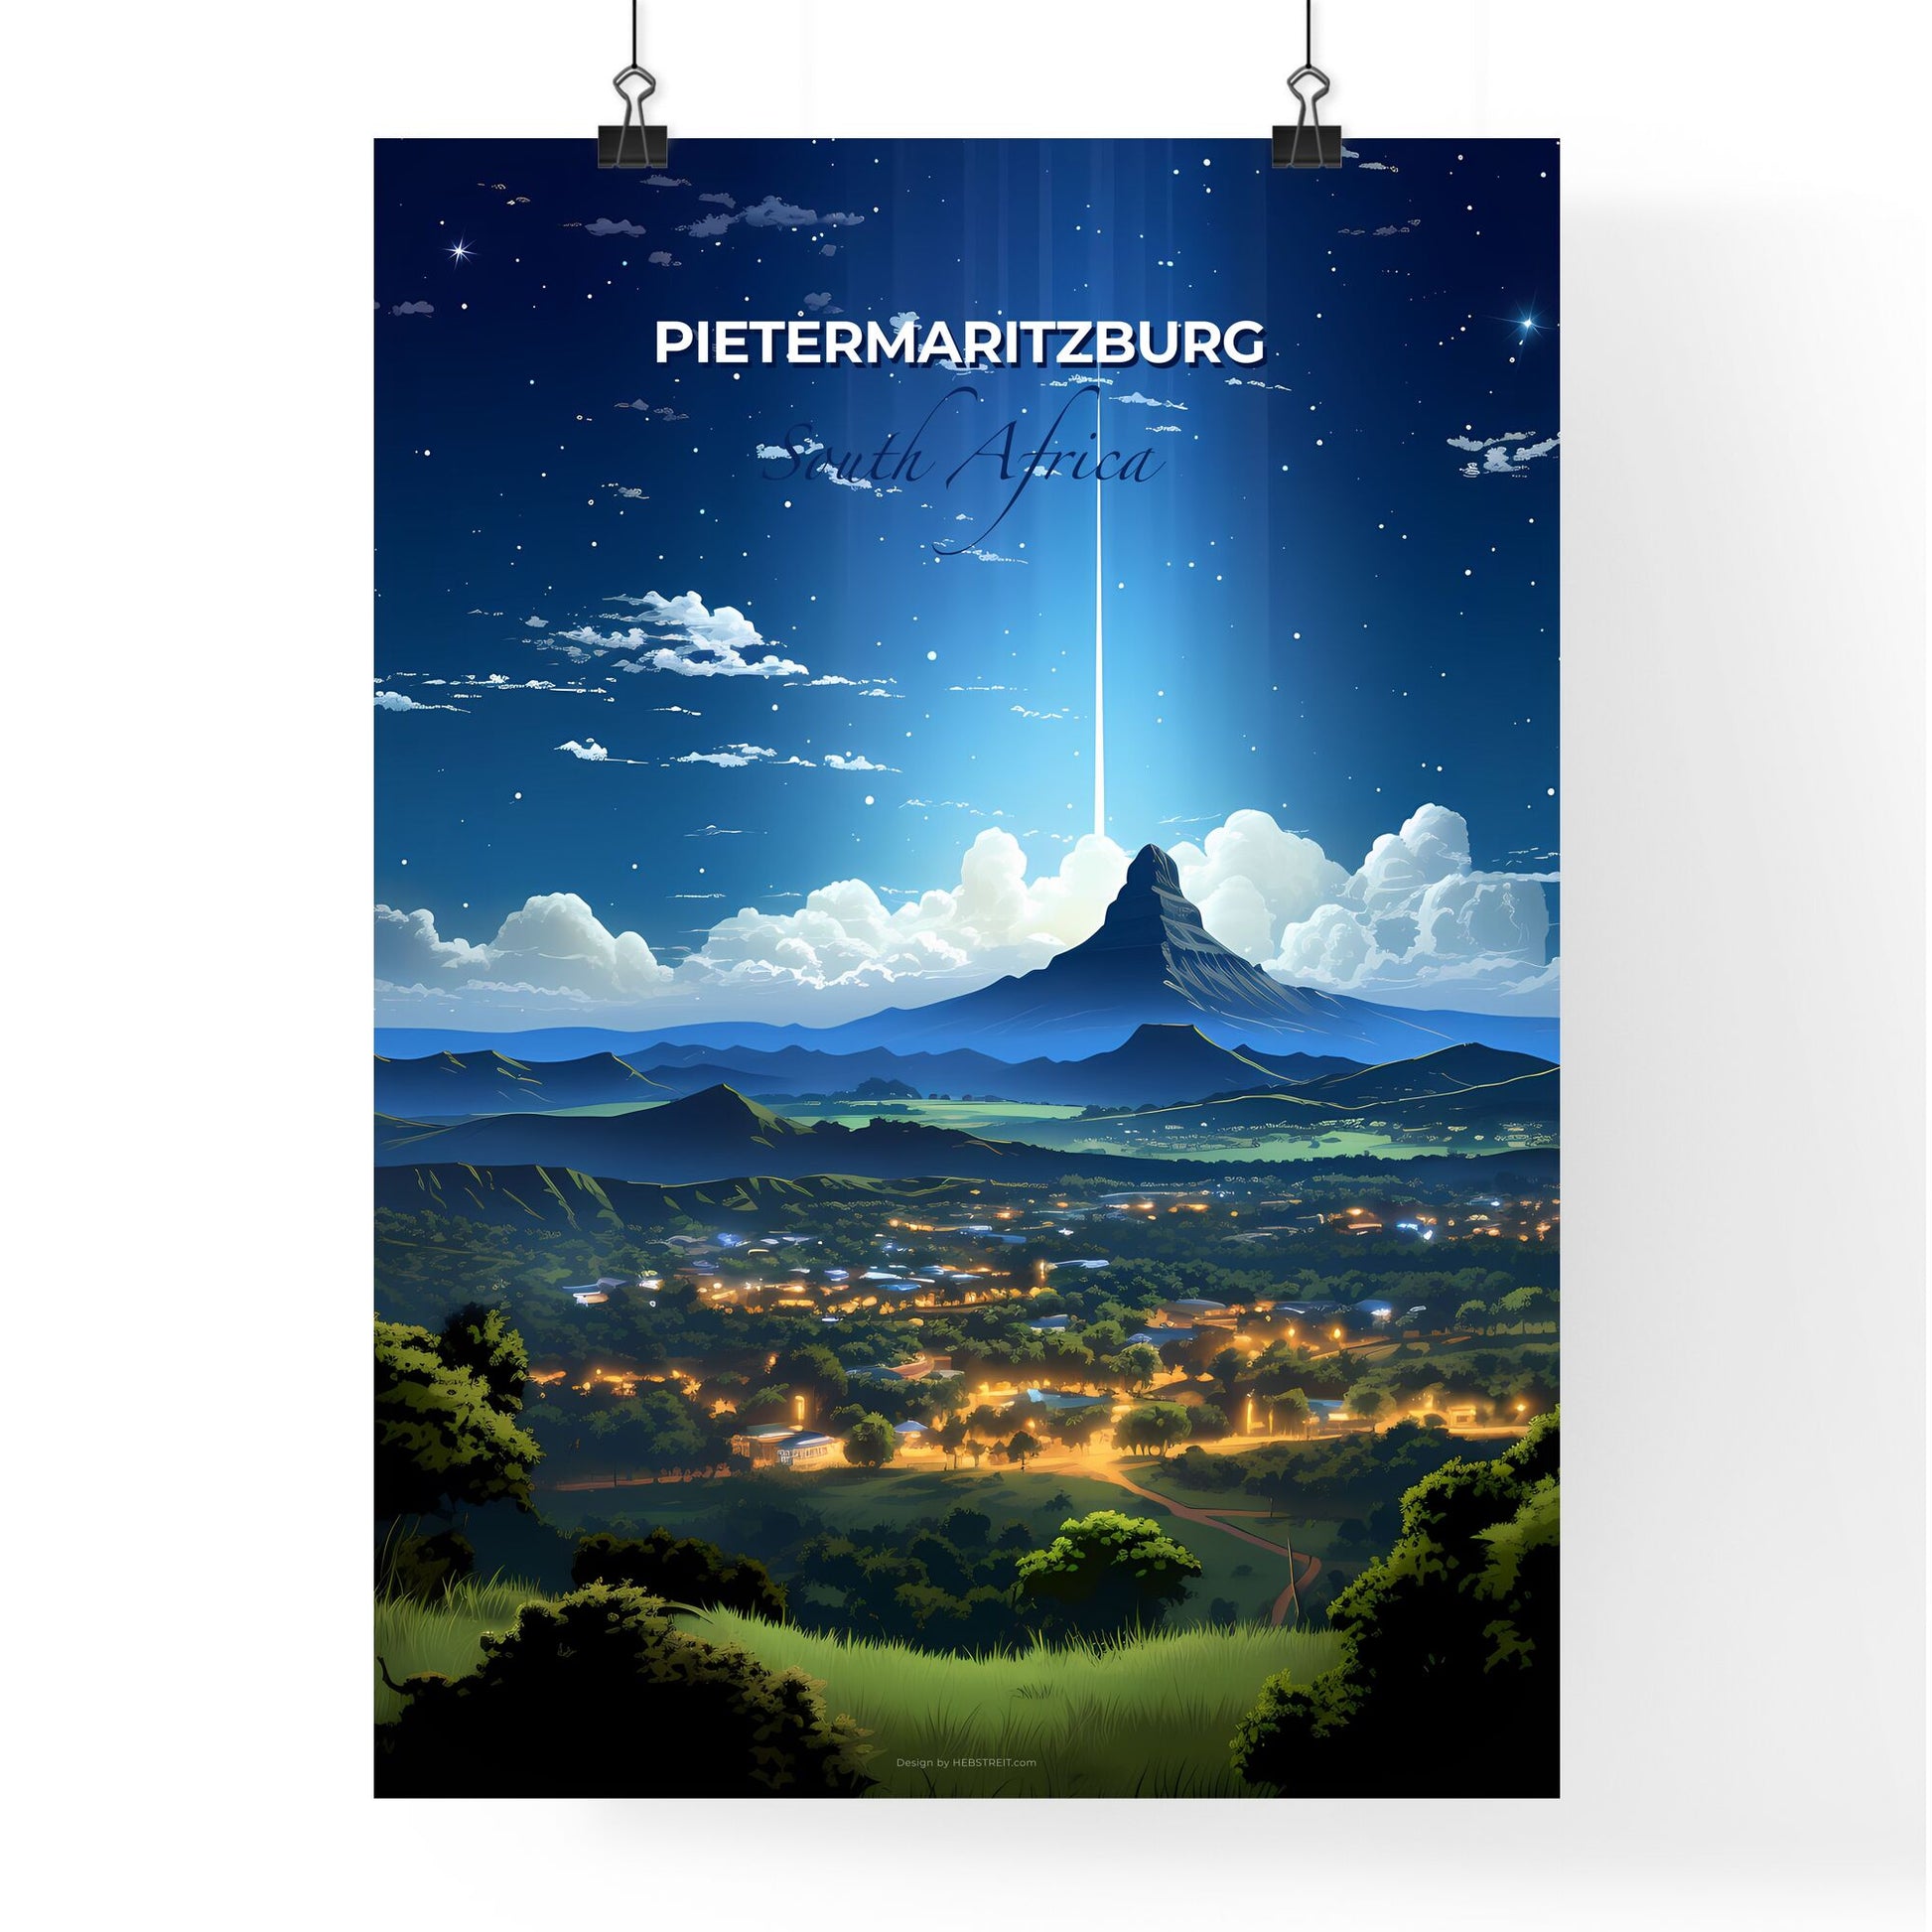 Artistic Landscape Painting of Pietermaritzburg Skyline, South Africa, Featuring a Vibrant City and Majestic Mountain Default Title